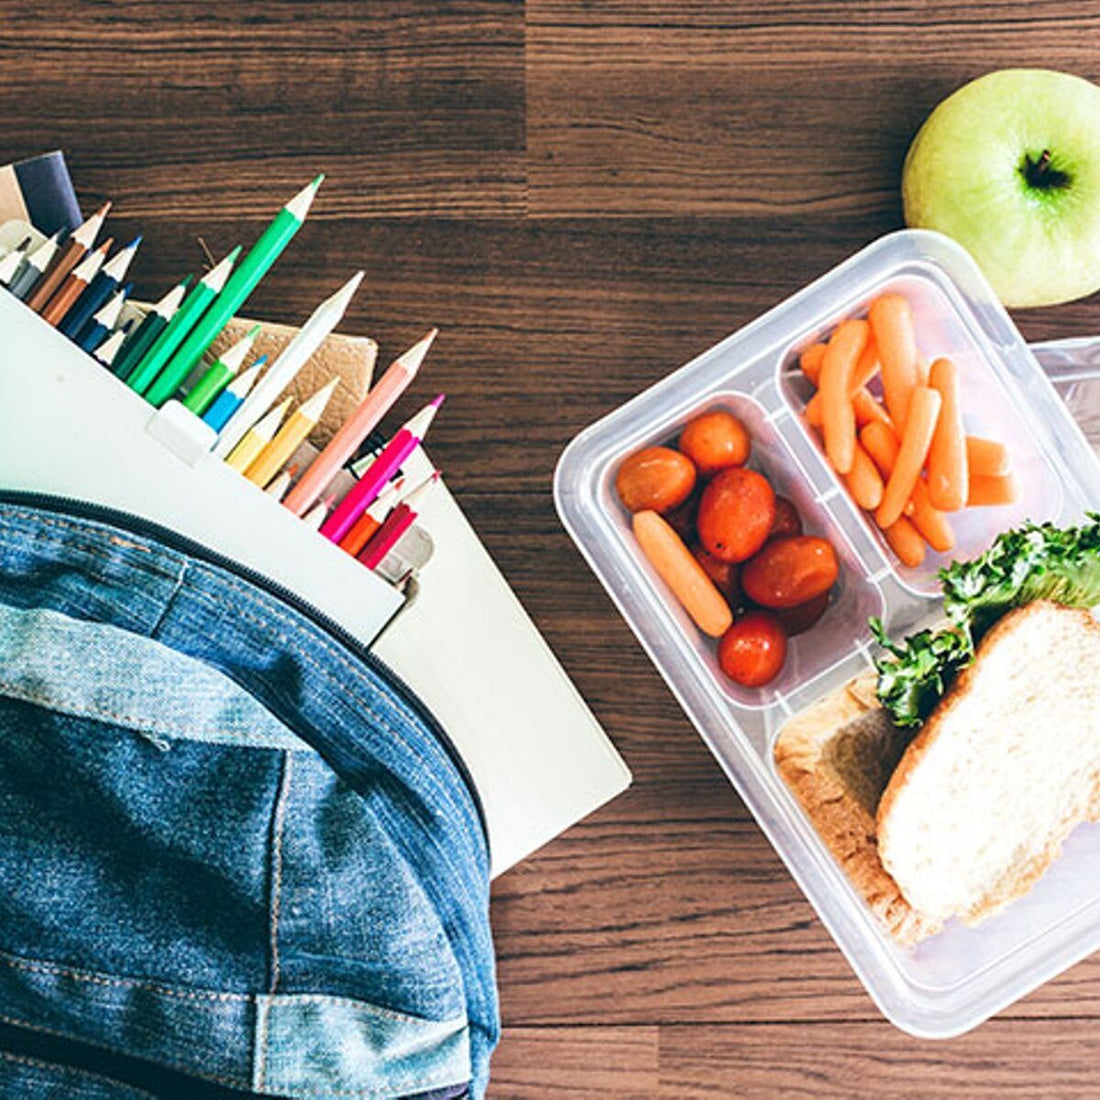 4 Healthy Tips To Make Back To School A Breeze